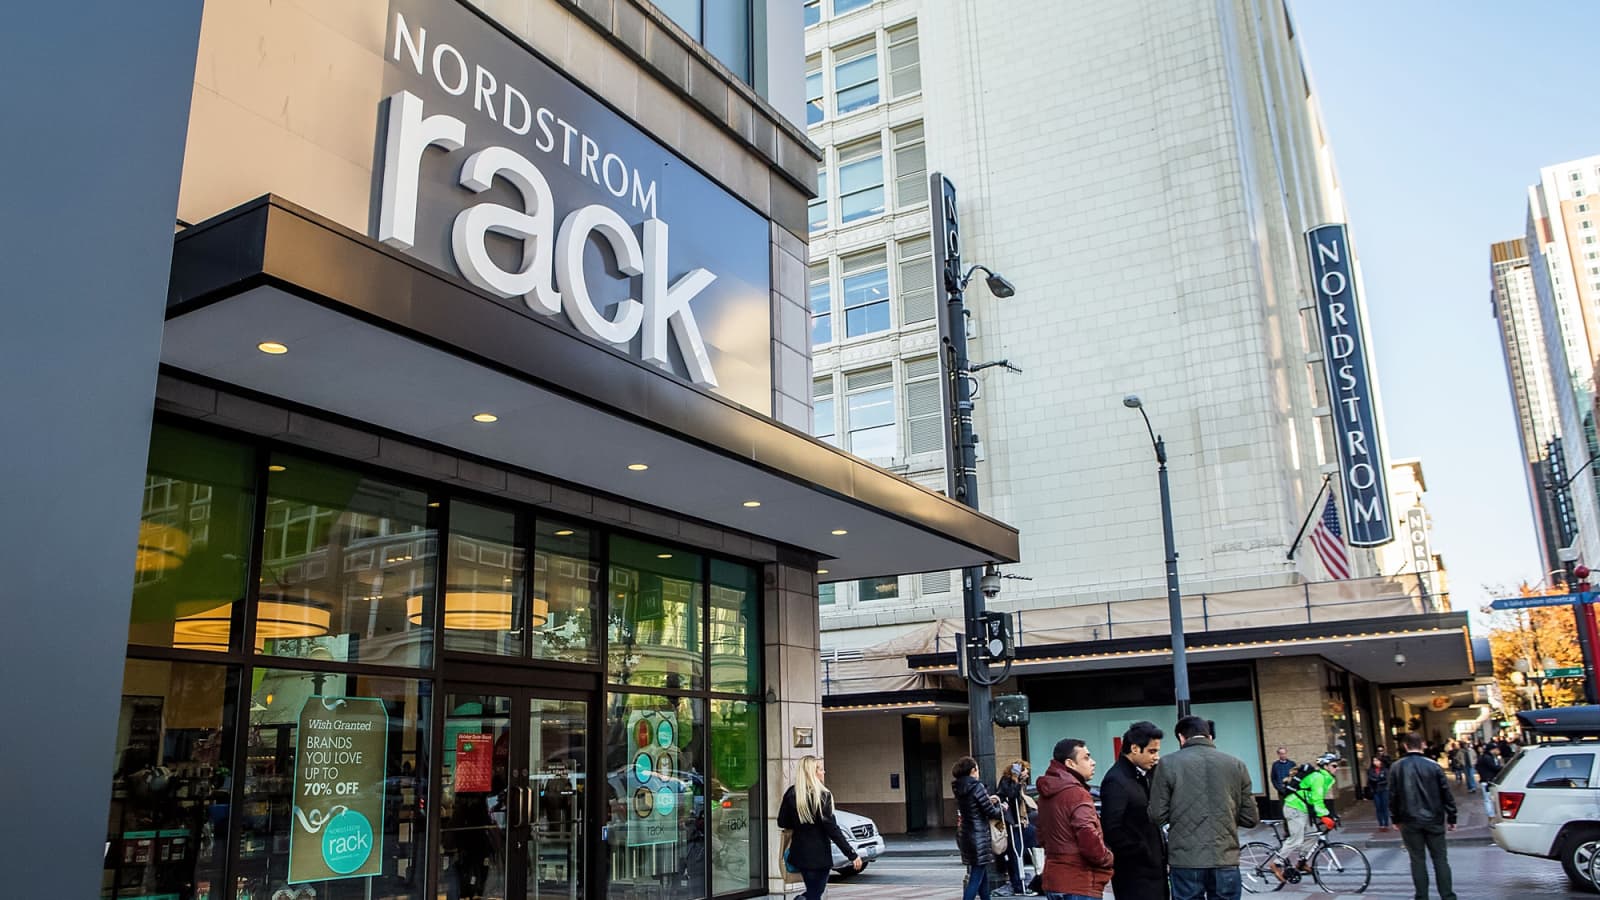 As retailers retreat, Nordstrom bets big on brick-and-mortar